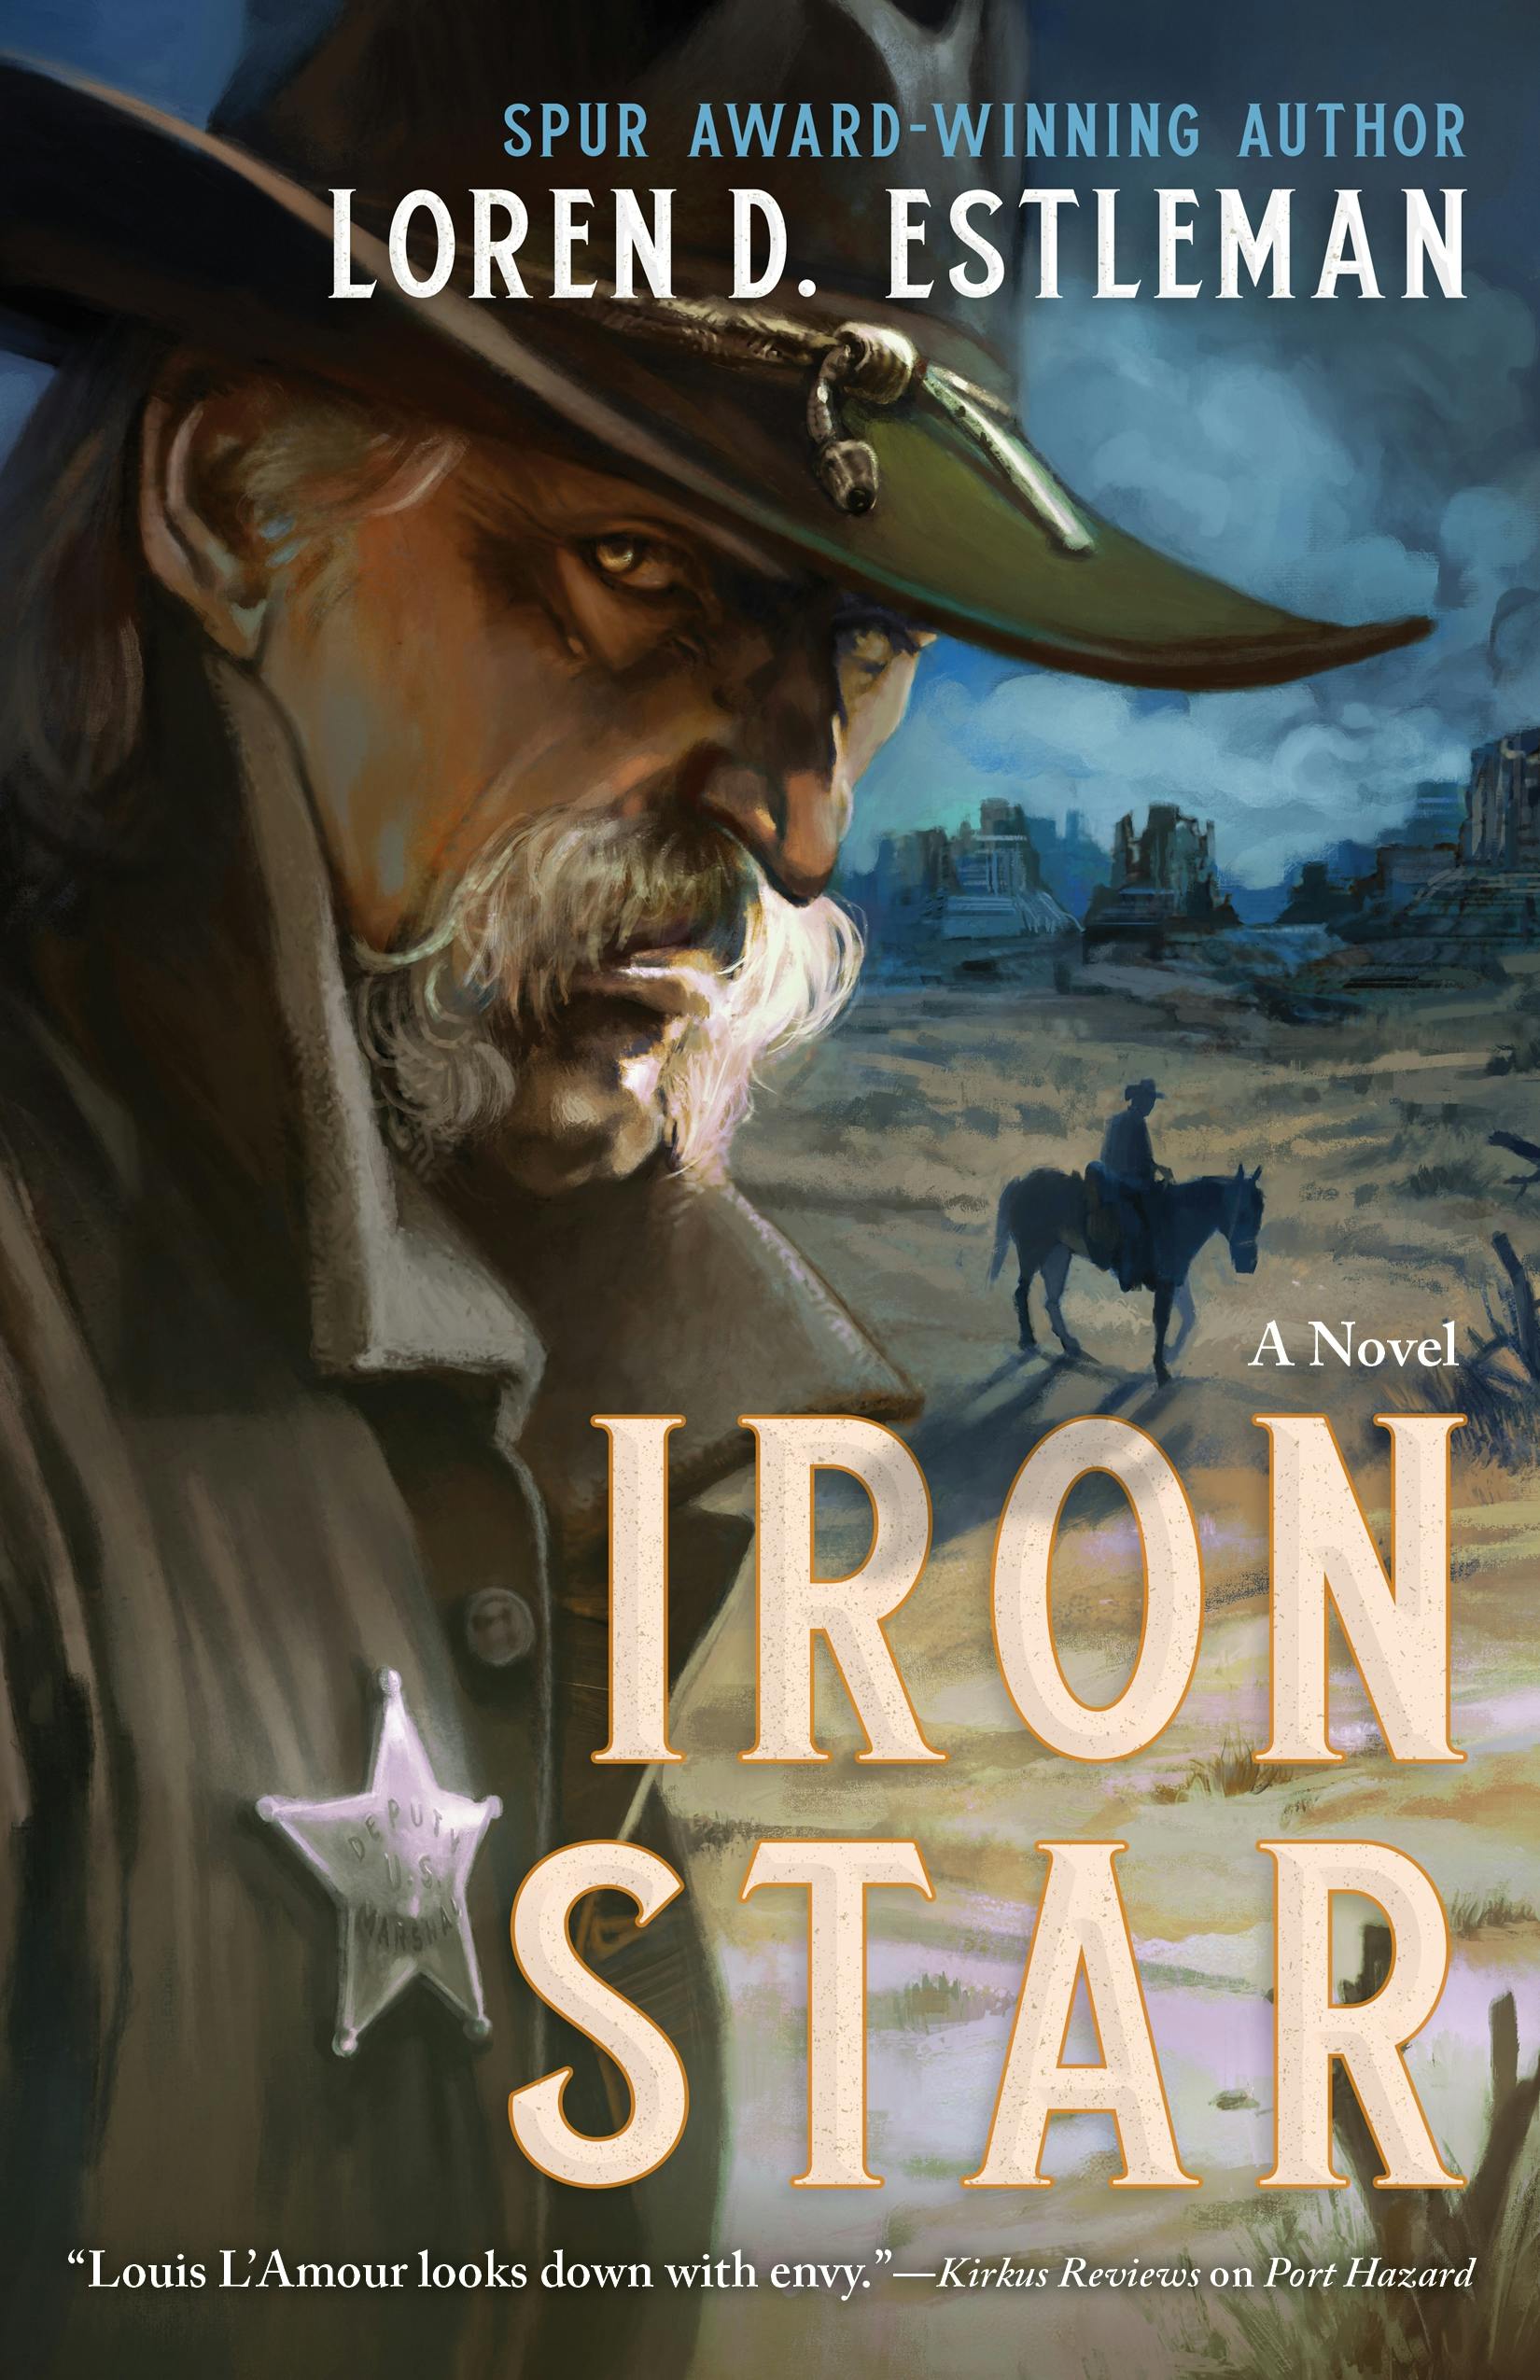 Cover for the book titled as: Iron Star